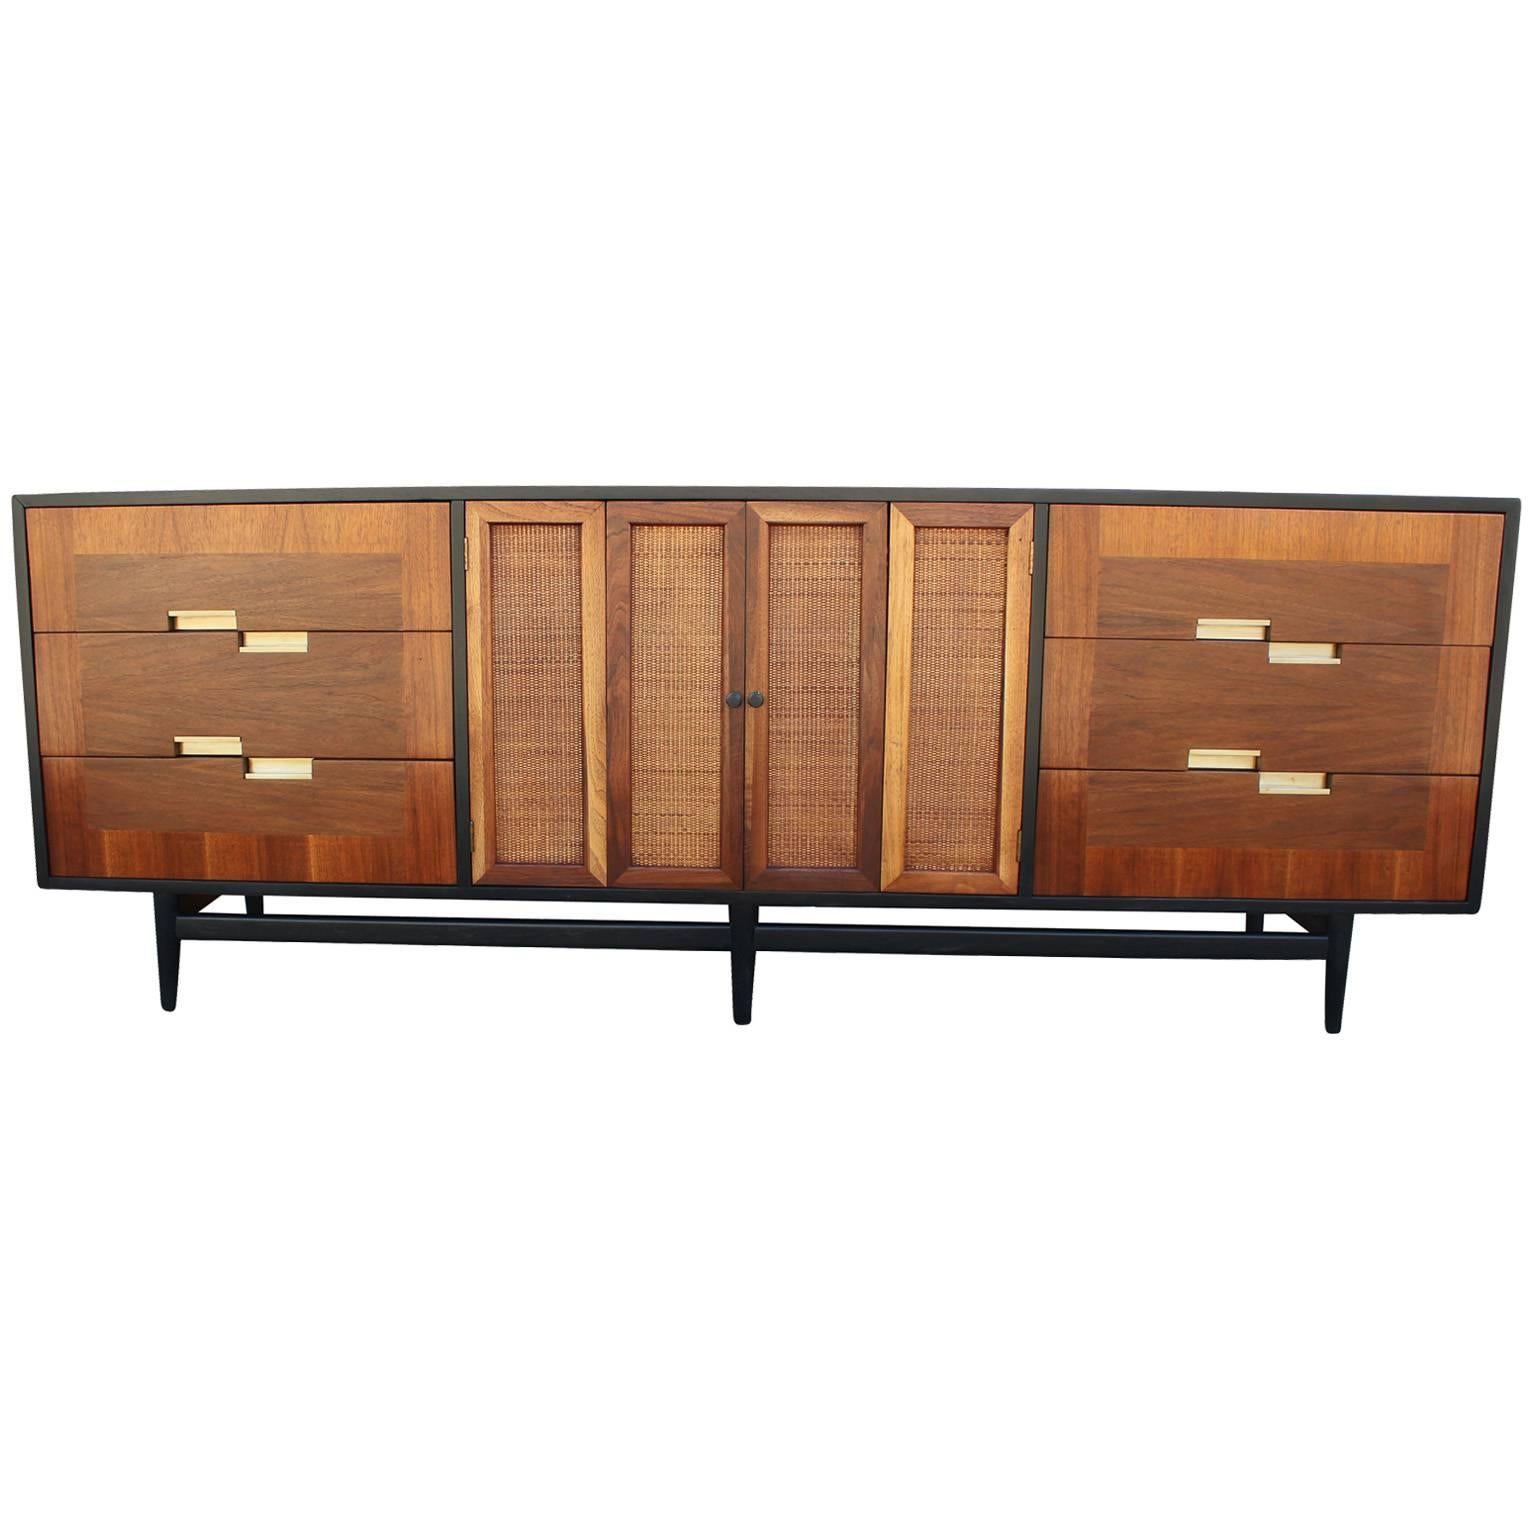 Mid-Century Modern Two-Tone American of Martinsville Dresser with Brass and Raffia Accents